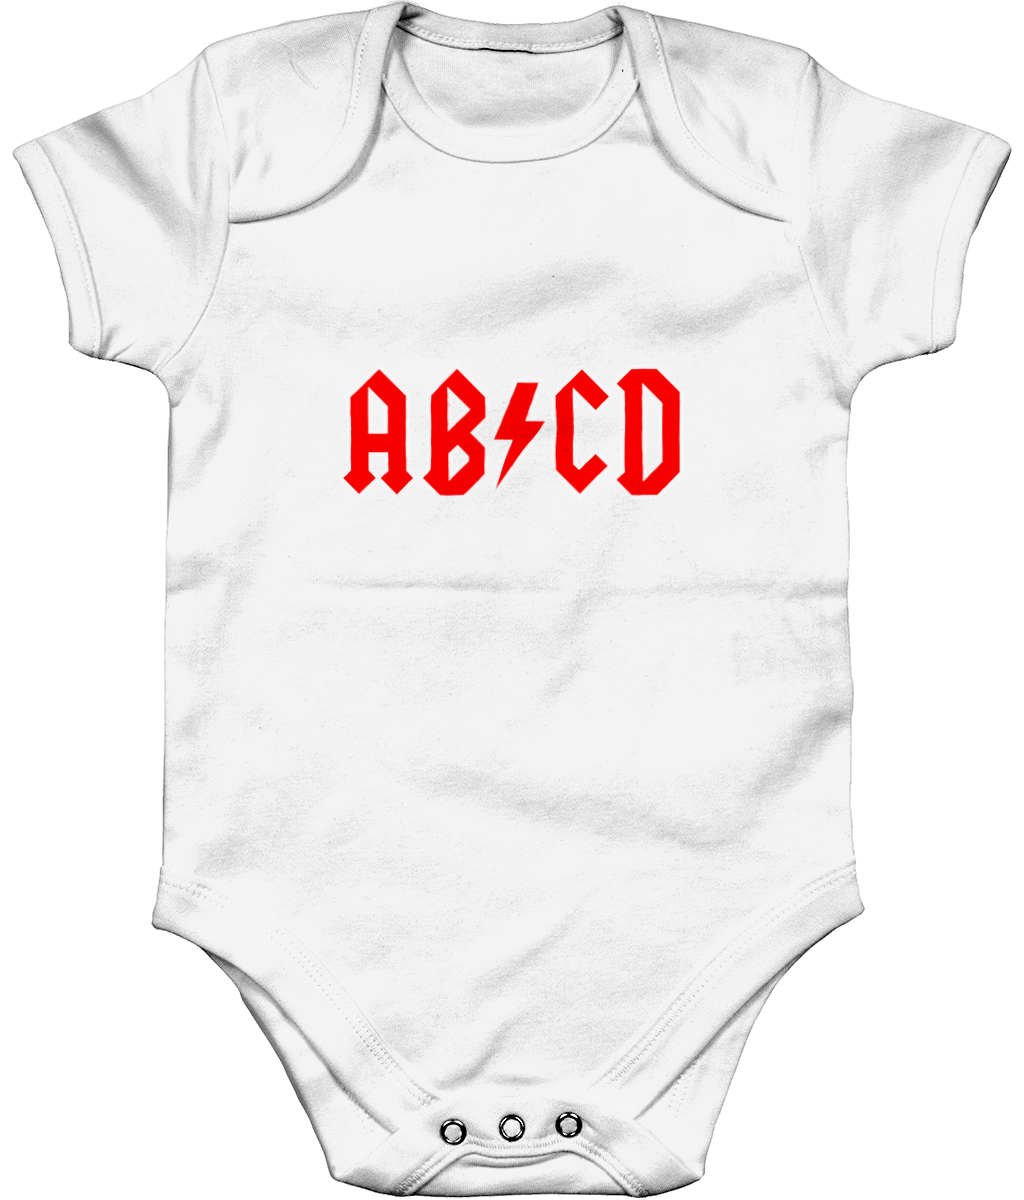 Soft Organic Cotton Baby Grow, ABCD Let's Rock!